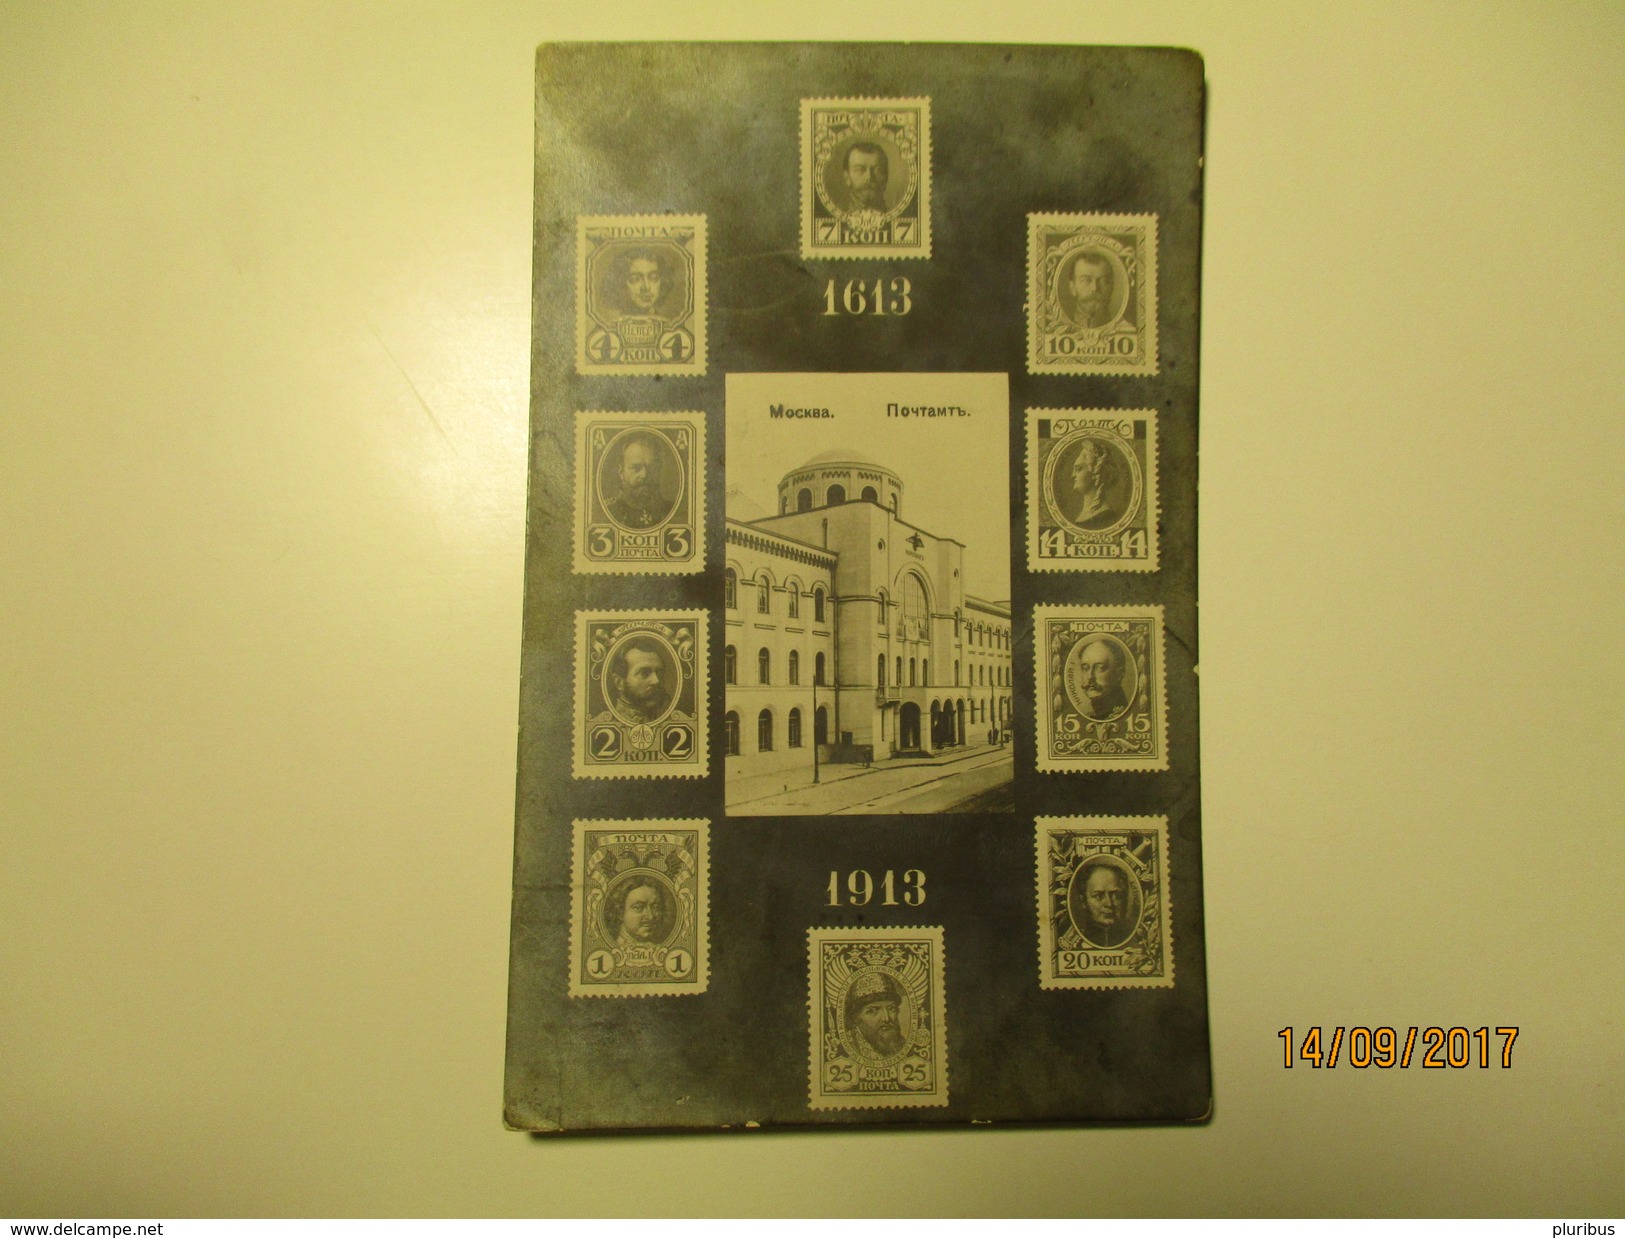 IMPERIAL RUSSIA ,  MOSCOW , POST OFFICE , ROMANOV TSAR DYNASTY 1613- 1913 STAMPS    , OLD POSTCARD , KO - Postzegels (afbeeldingen)